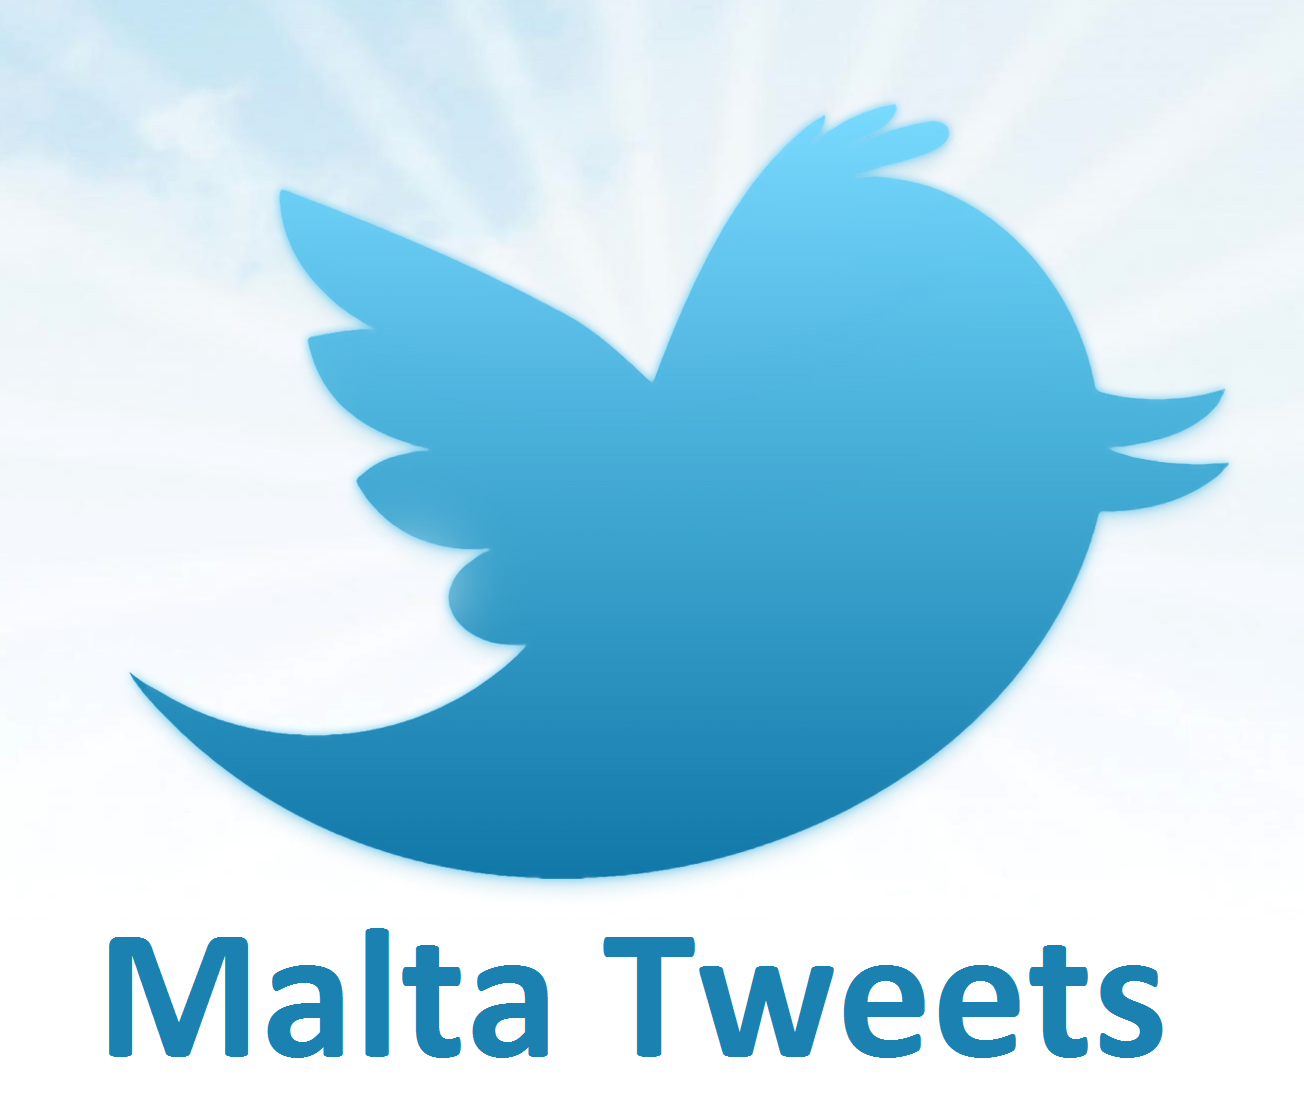 Malta Tweets was designed to enable Maltese twitter users to tweet and make sure that Maltese people  hear what you have to say, just tag us into your tweets!